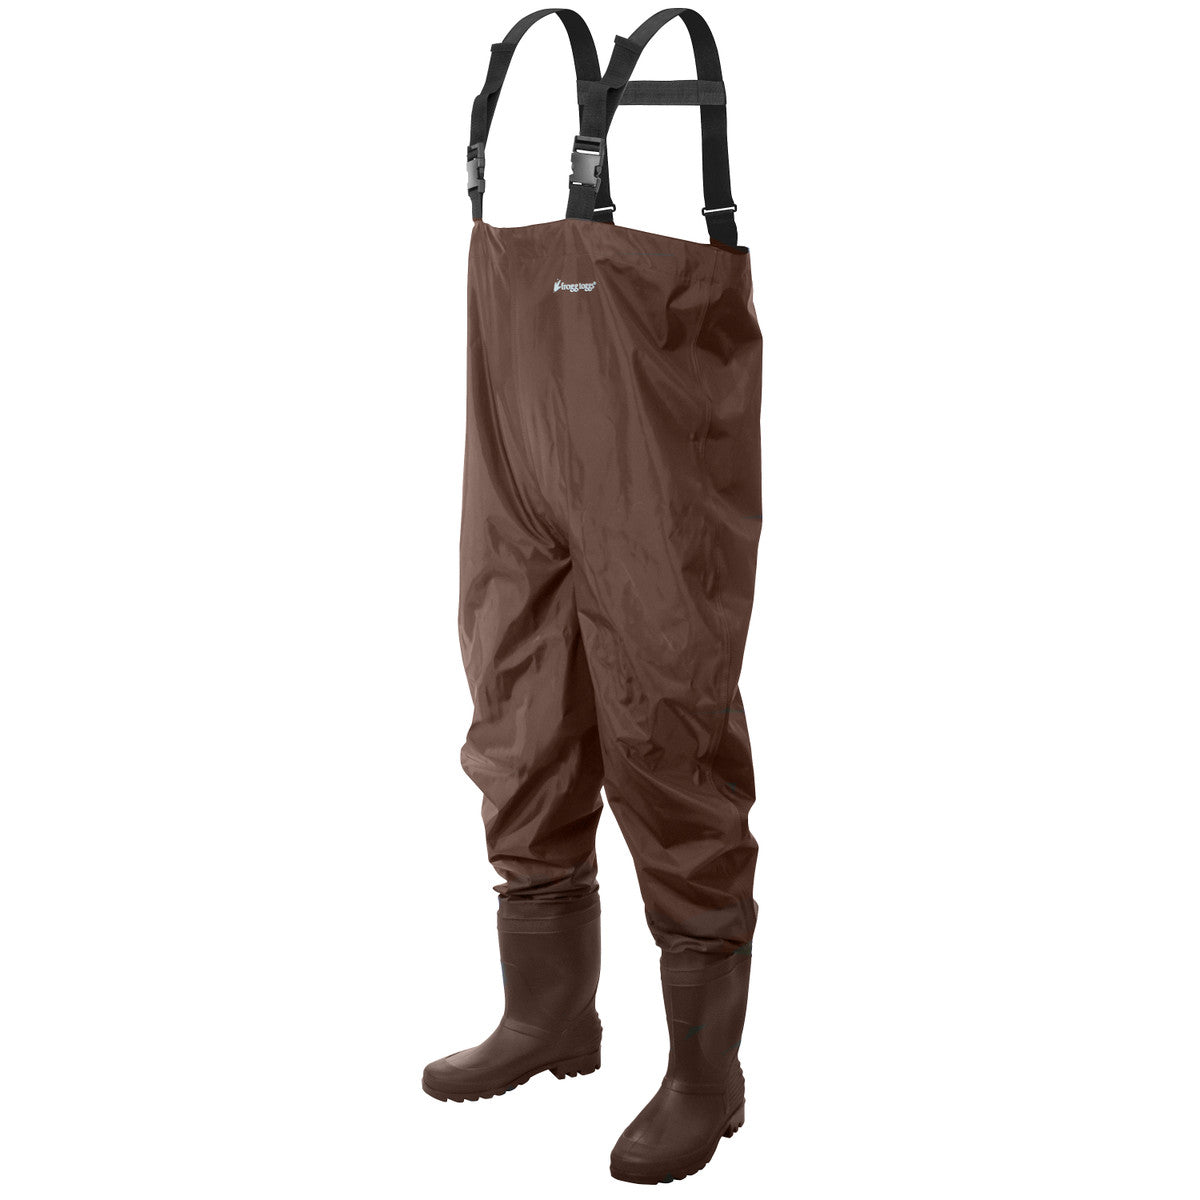 Frogg Toggs Rana PVC Lug Sole Chest Wader